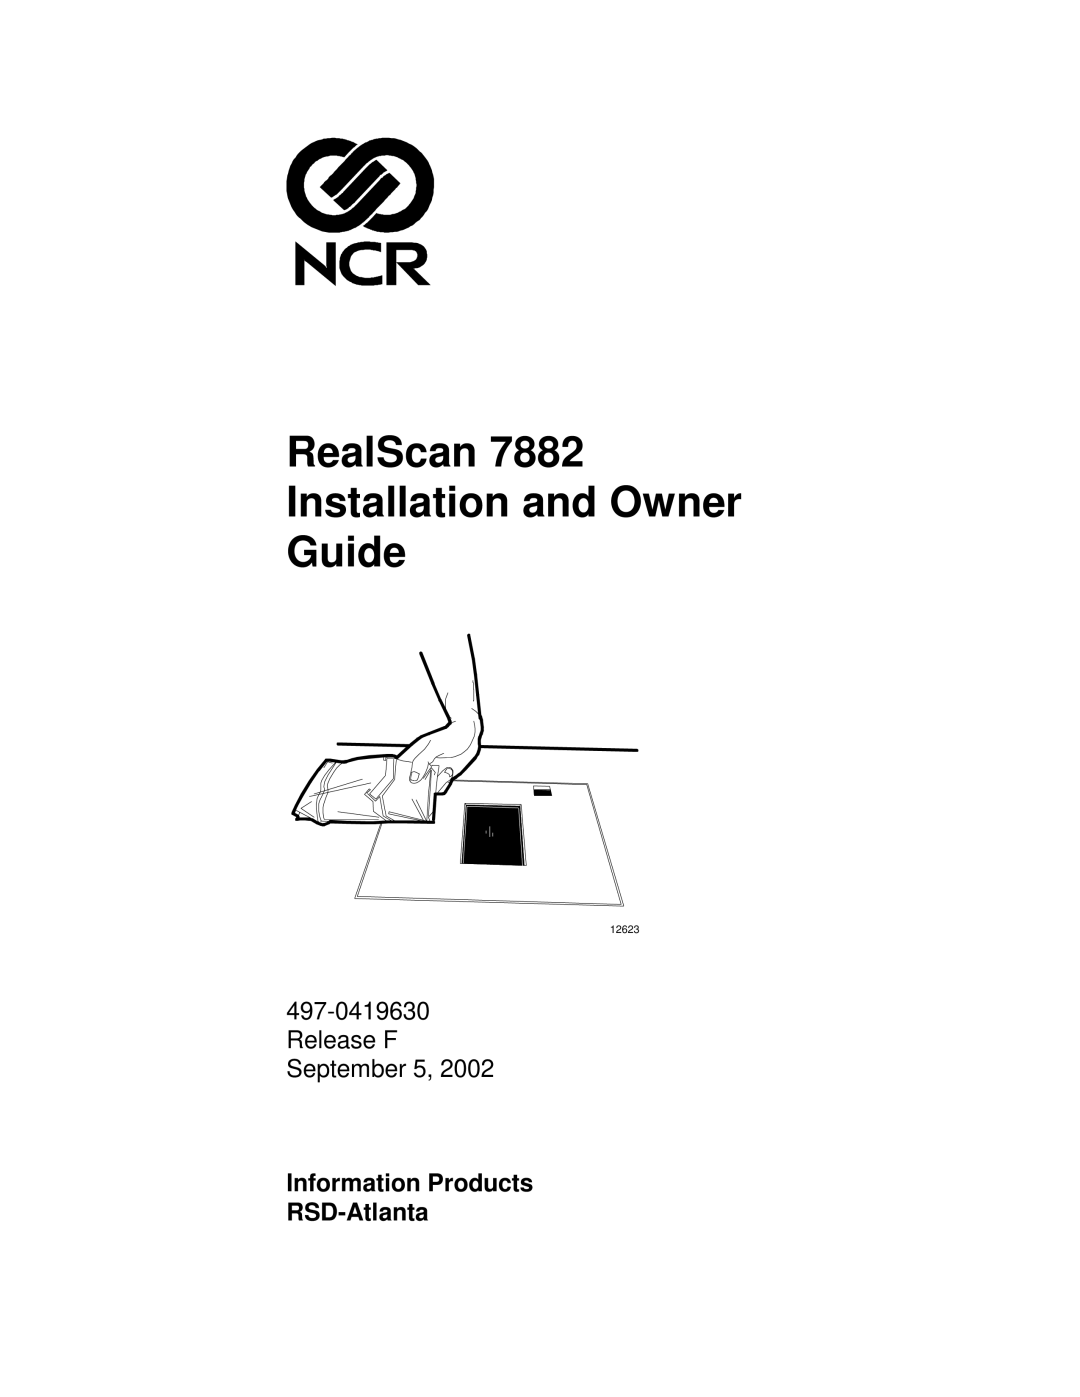 NCR 7882 manual RealScan Installation and Owner Guide, Information Products RSD-Atlanta, Release F September 5, 12623 